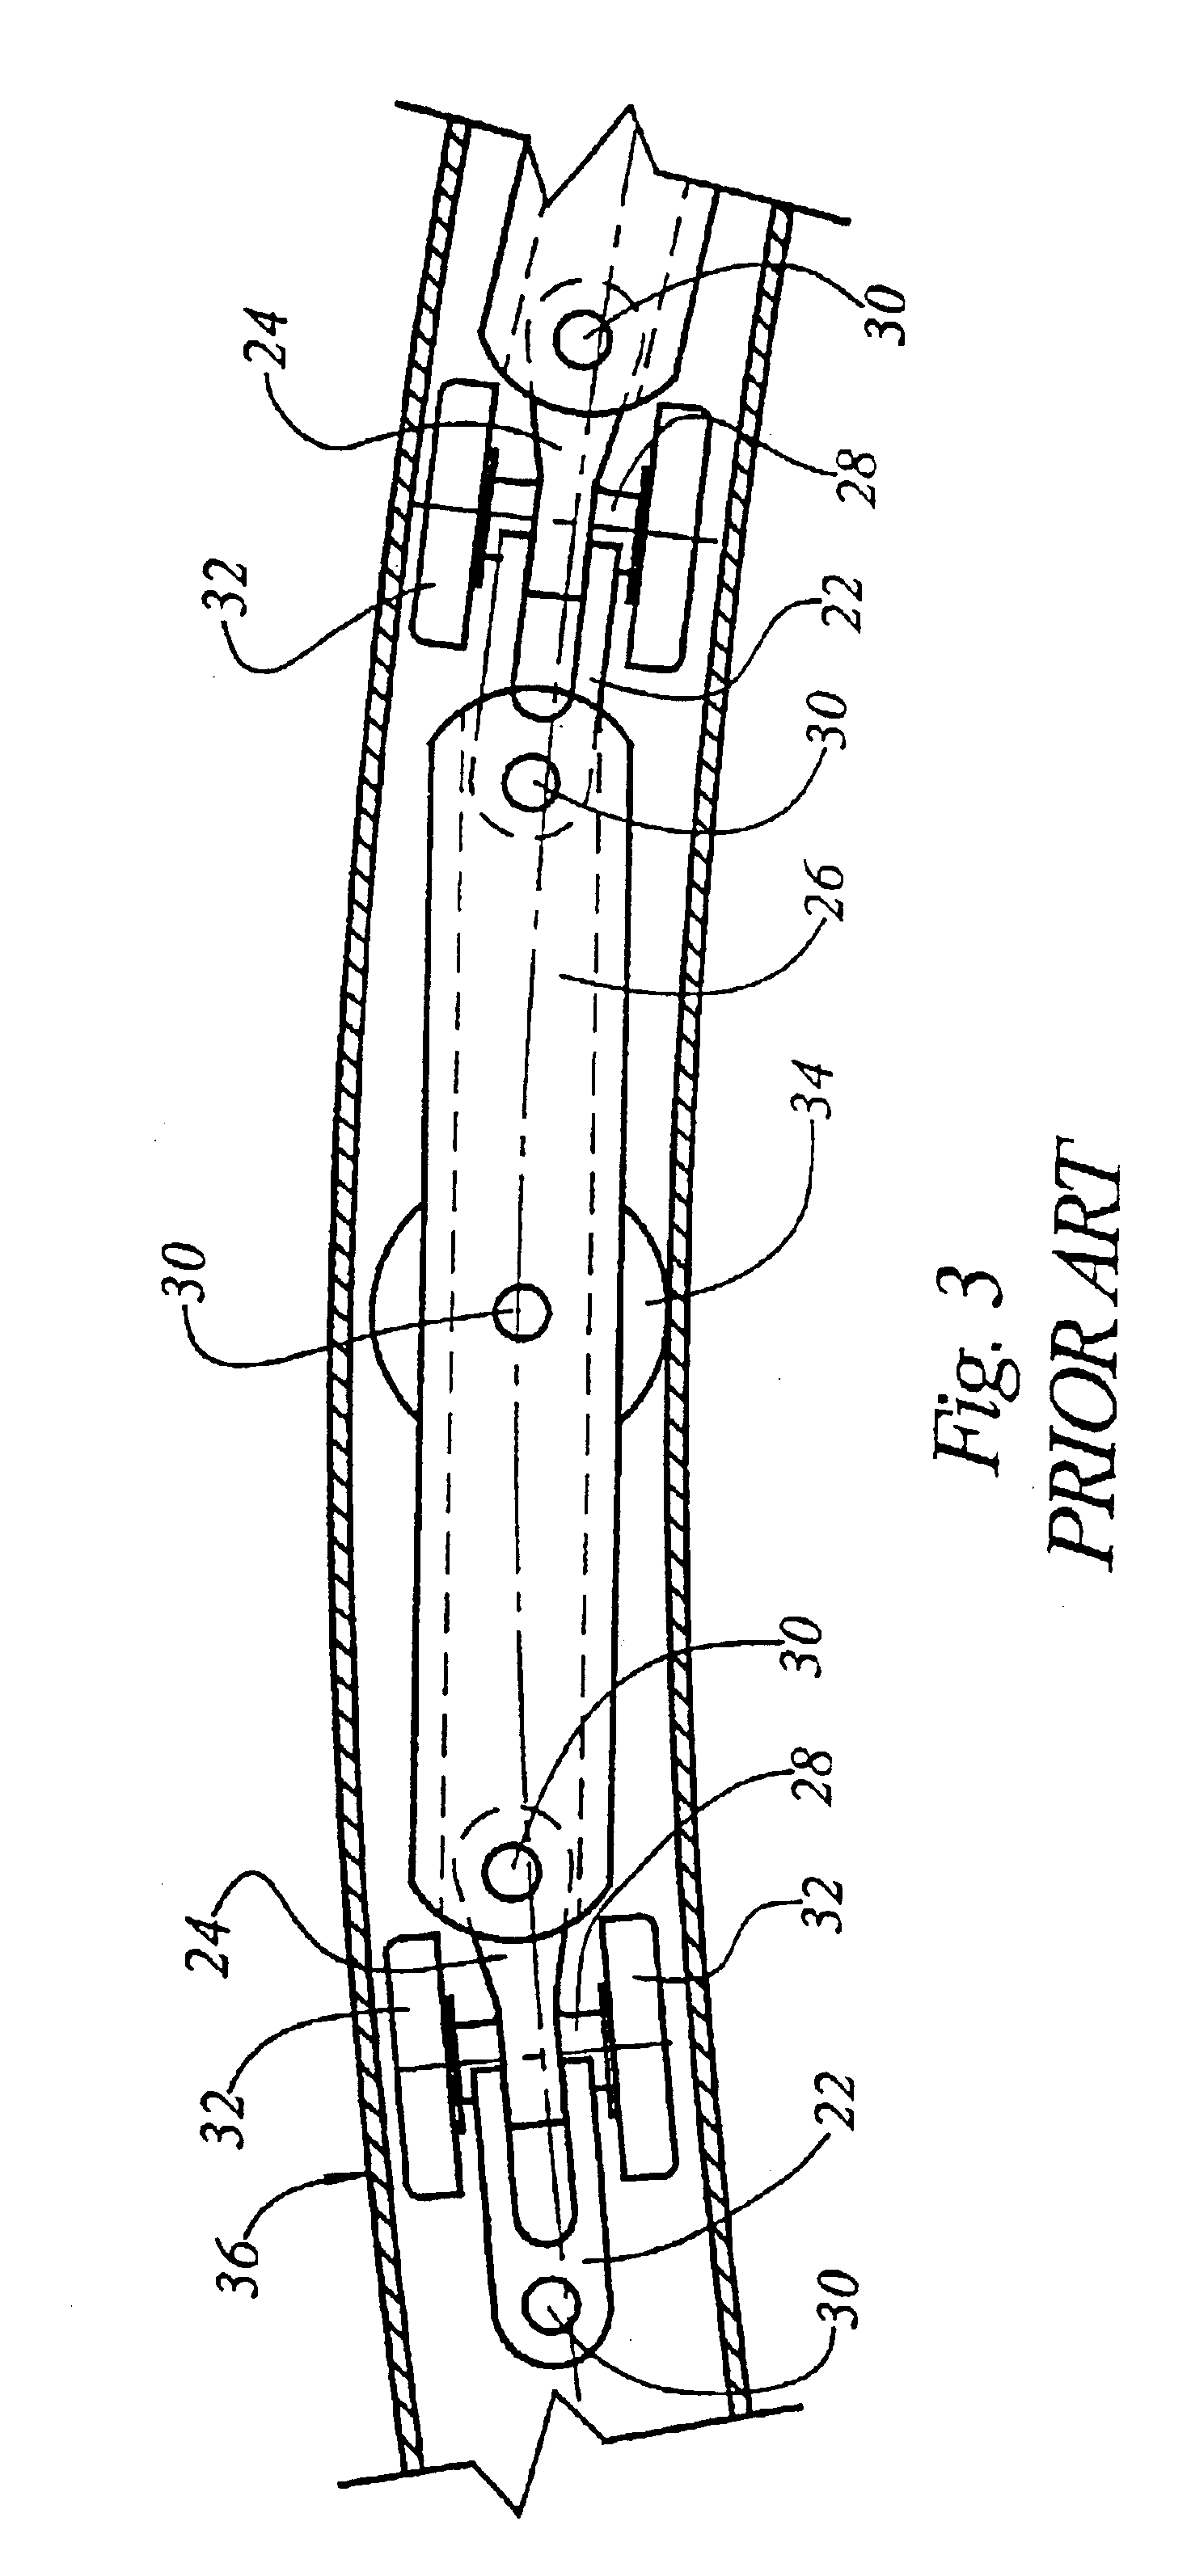 Conveyor for continuous proofing and baking apparatus